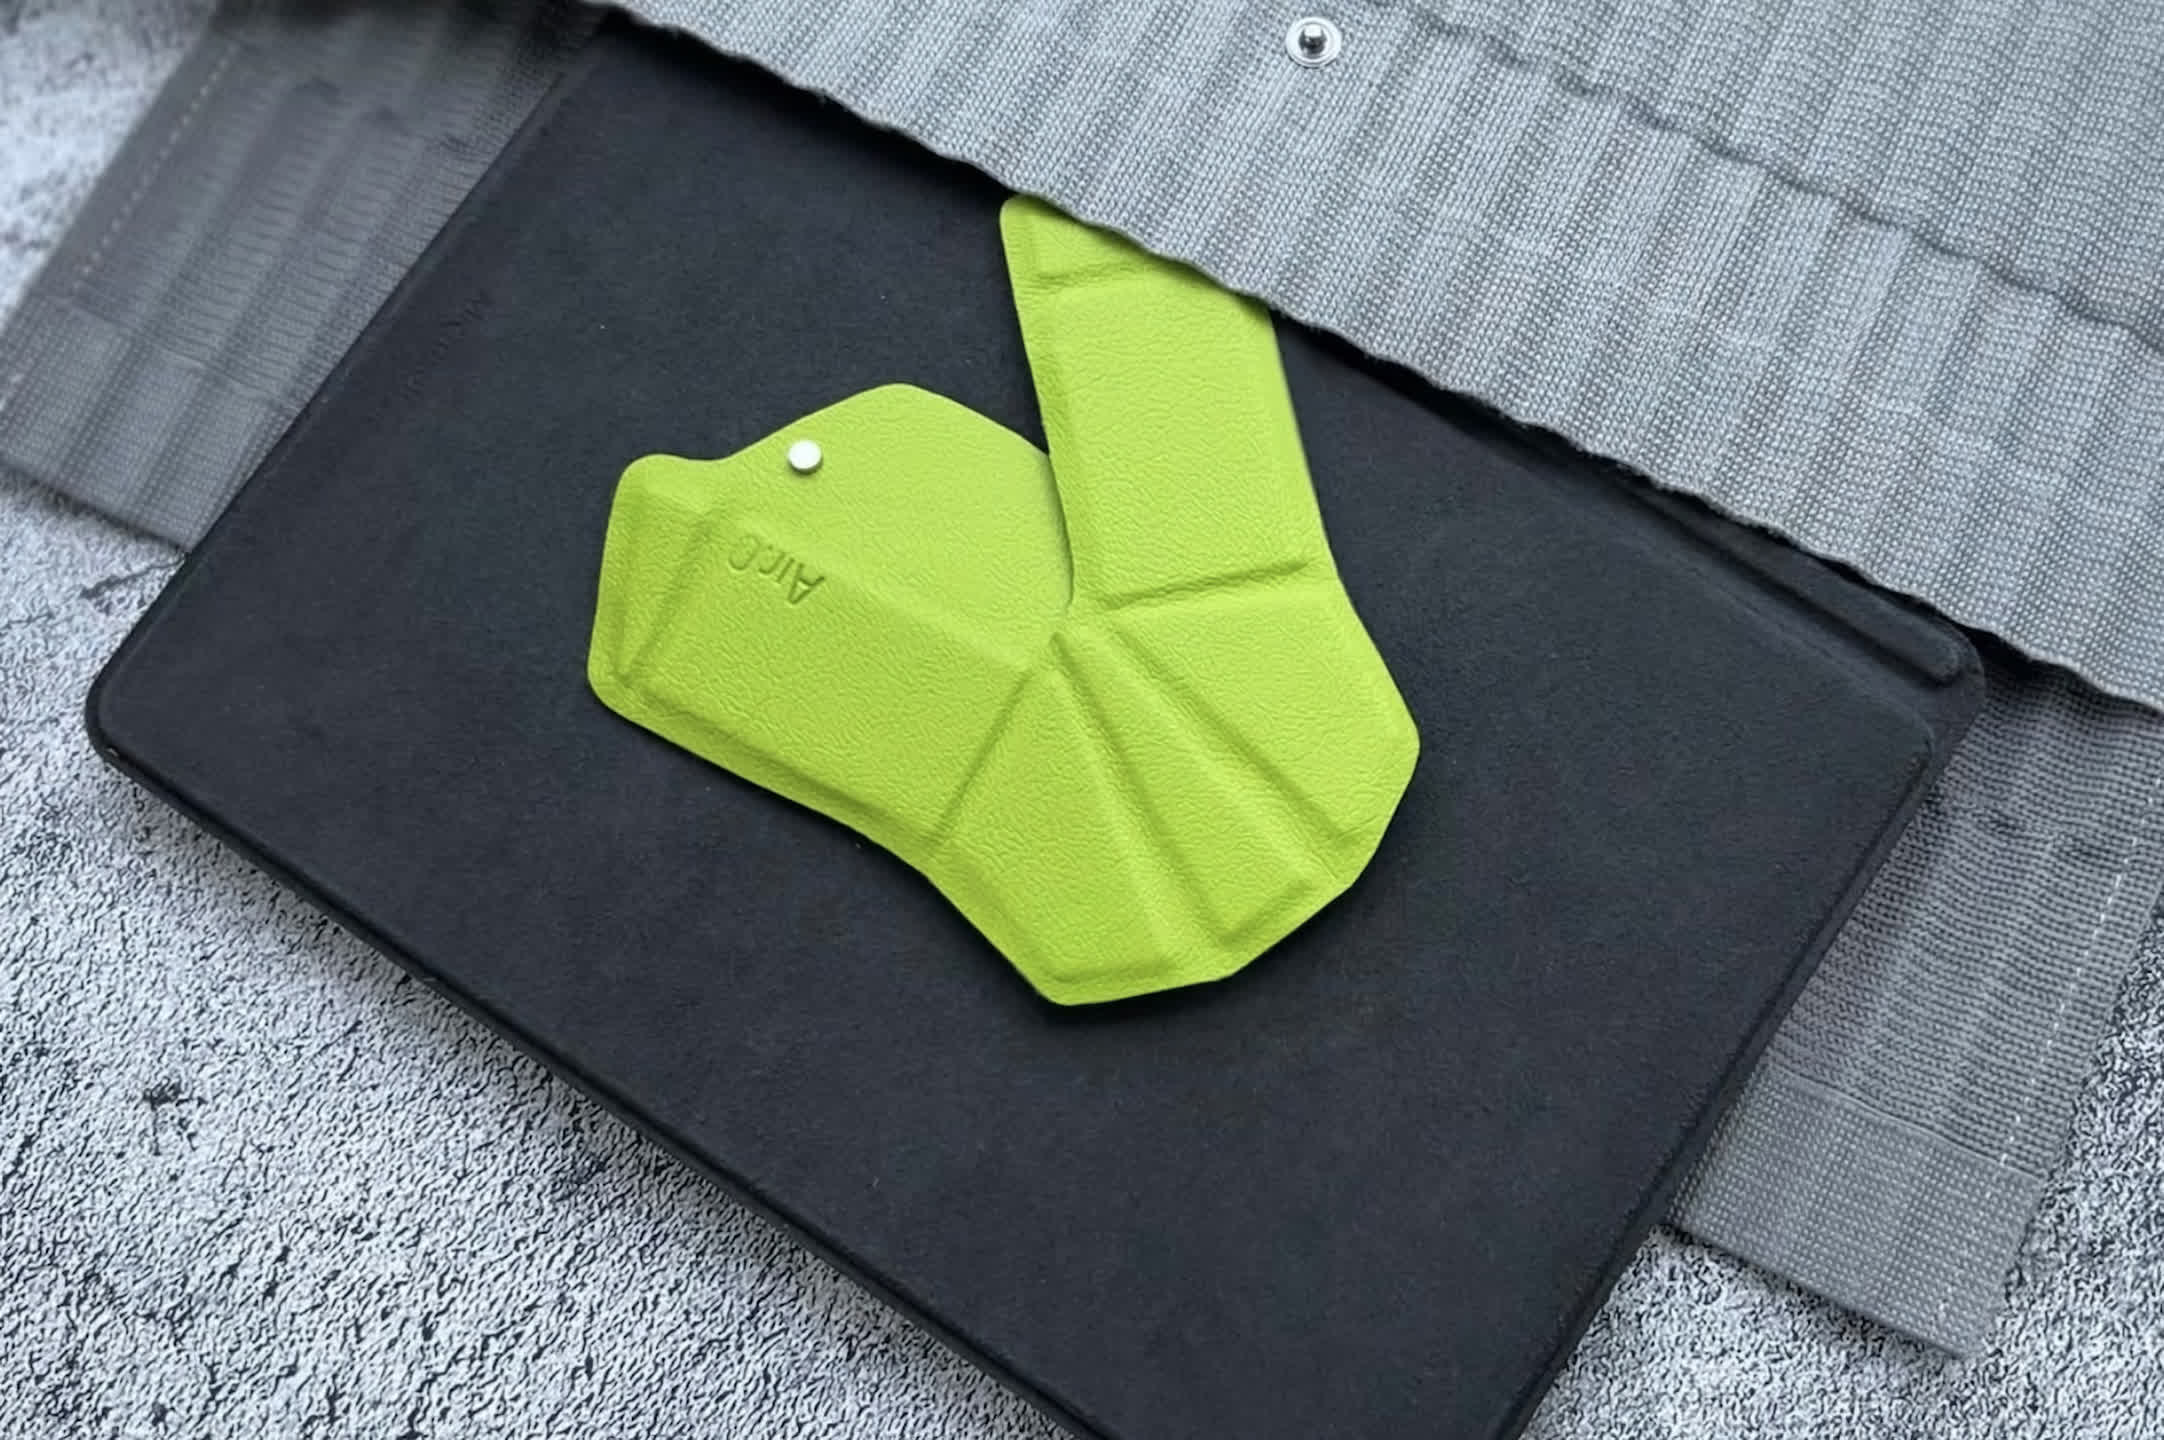 Origami-inspired mouse folds flat when not in use